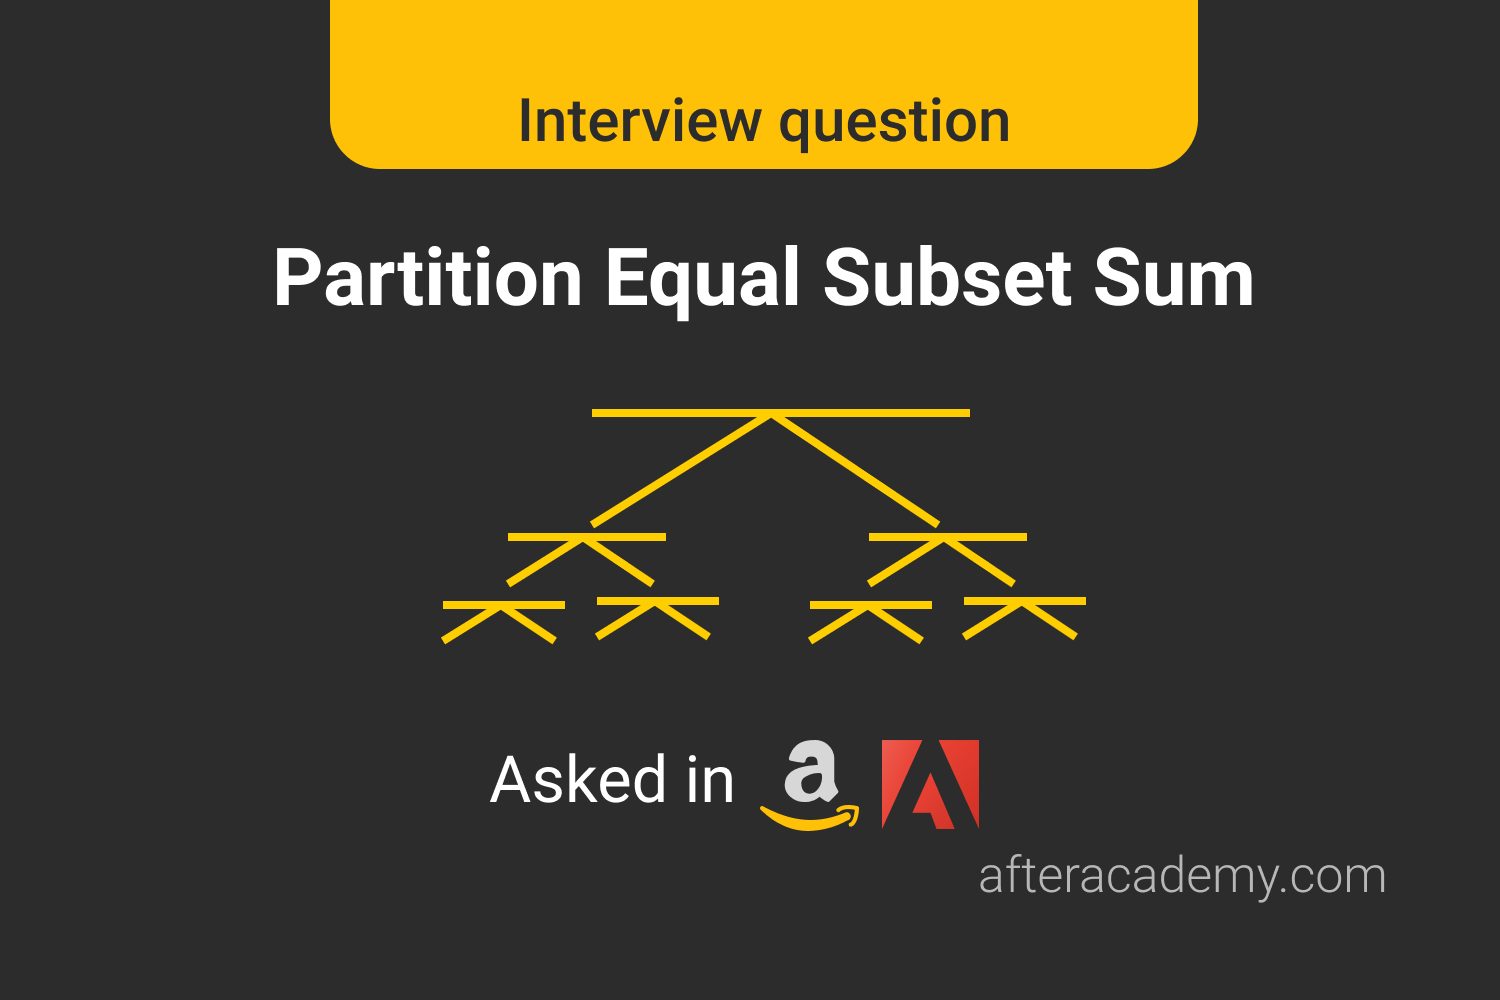 Partition Equal Subset Sum